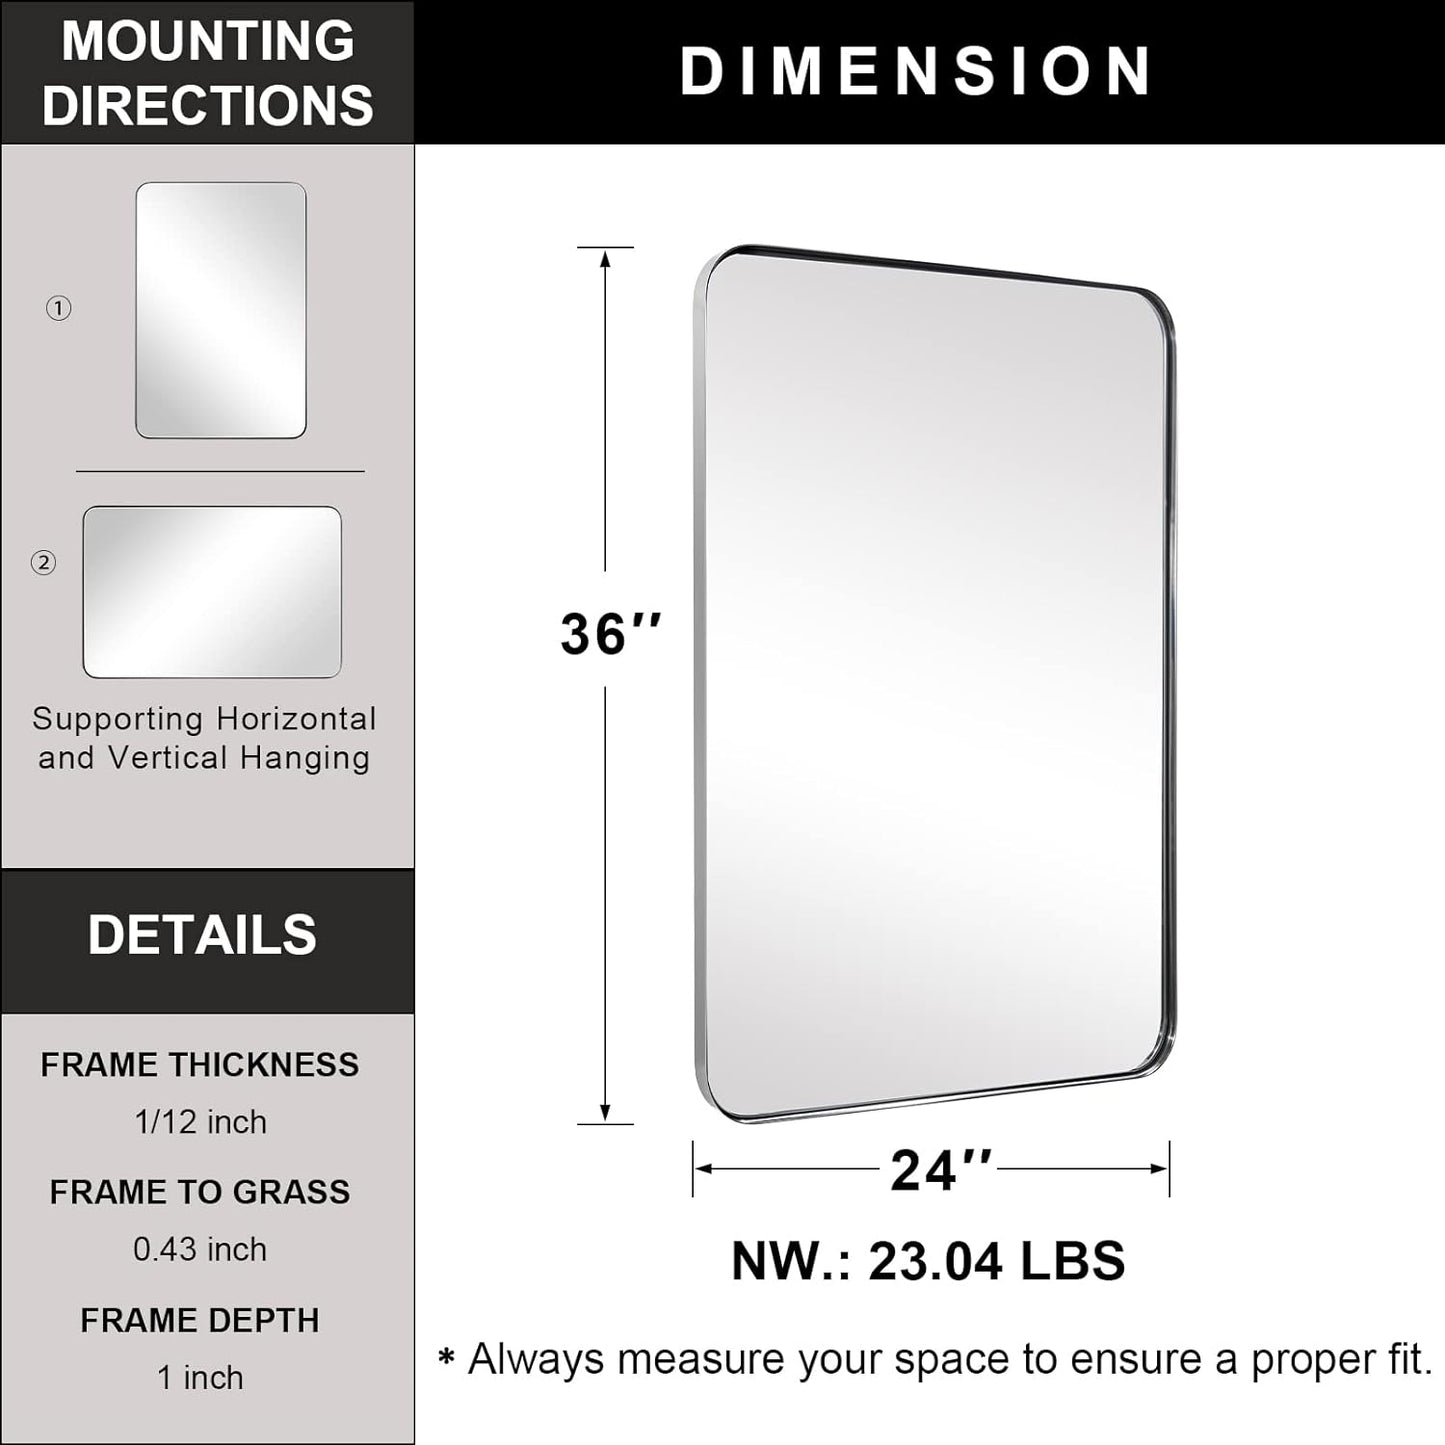 Chrome Mirror for Bathroom, 24”X36” Metal Frame Wall Mirror, Rectangle Stainless Steel Rounded Corner Mirror with 1’’ Deep Set Design Hangs Horizontal or Vertical